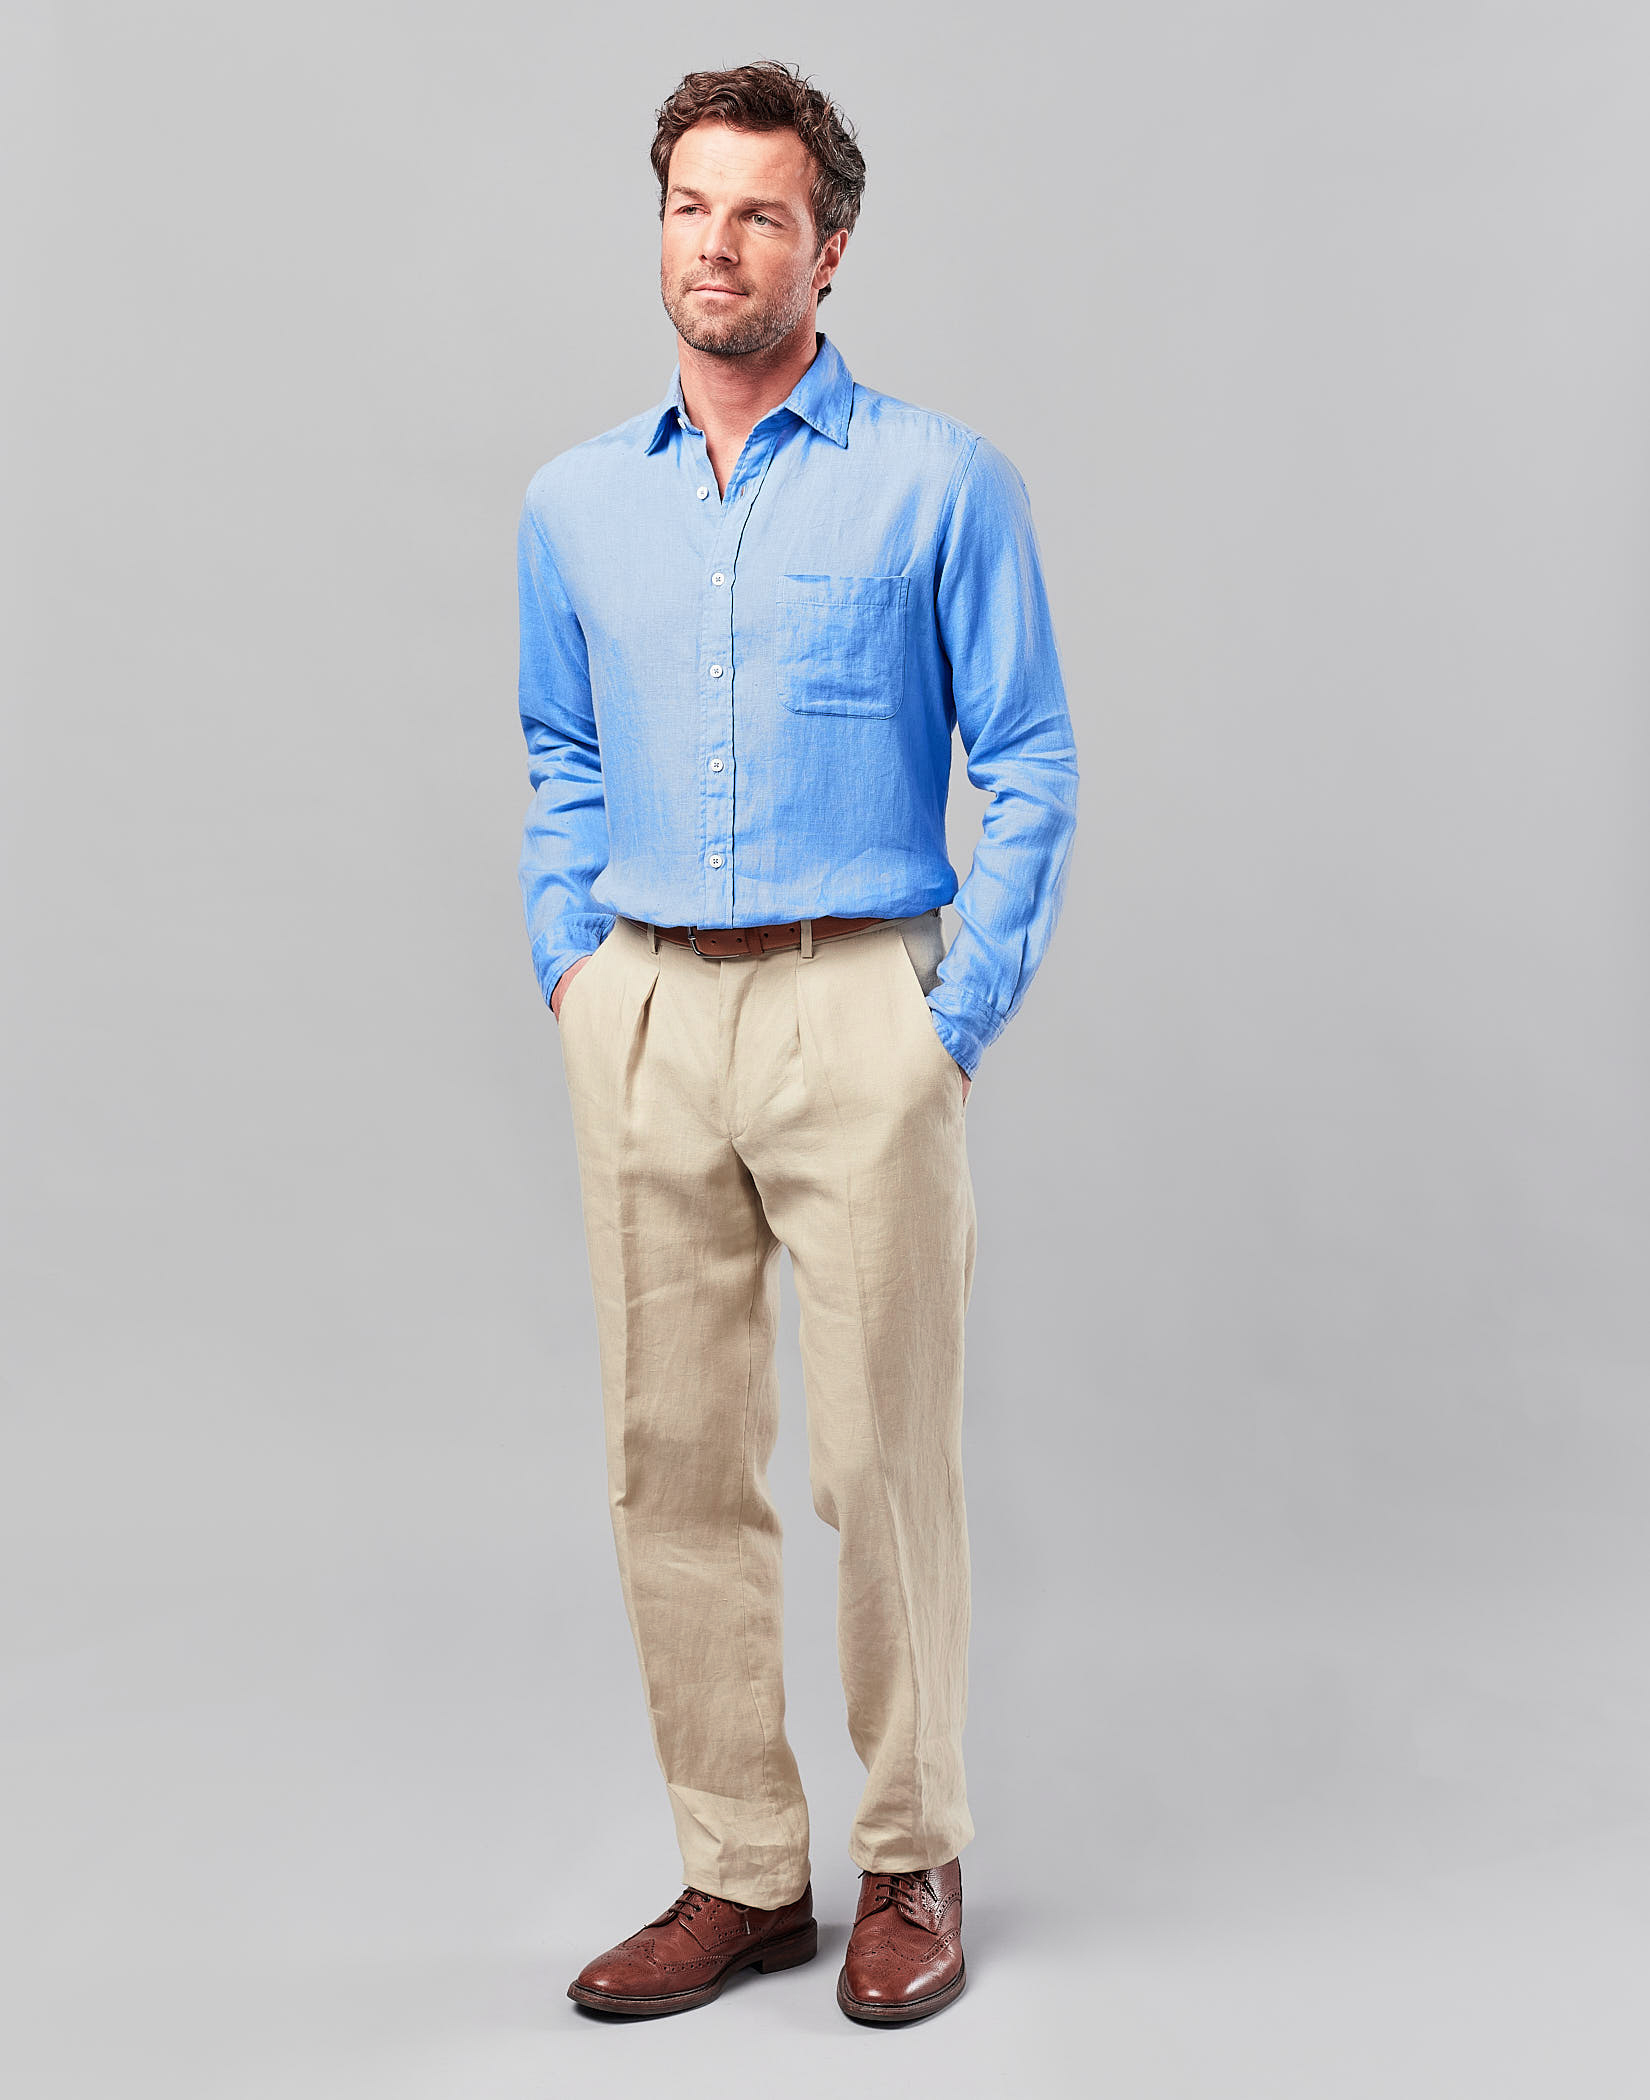 Can men wear pink and blue together? - AvenueSixty